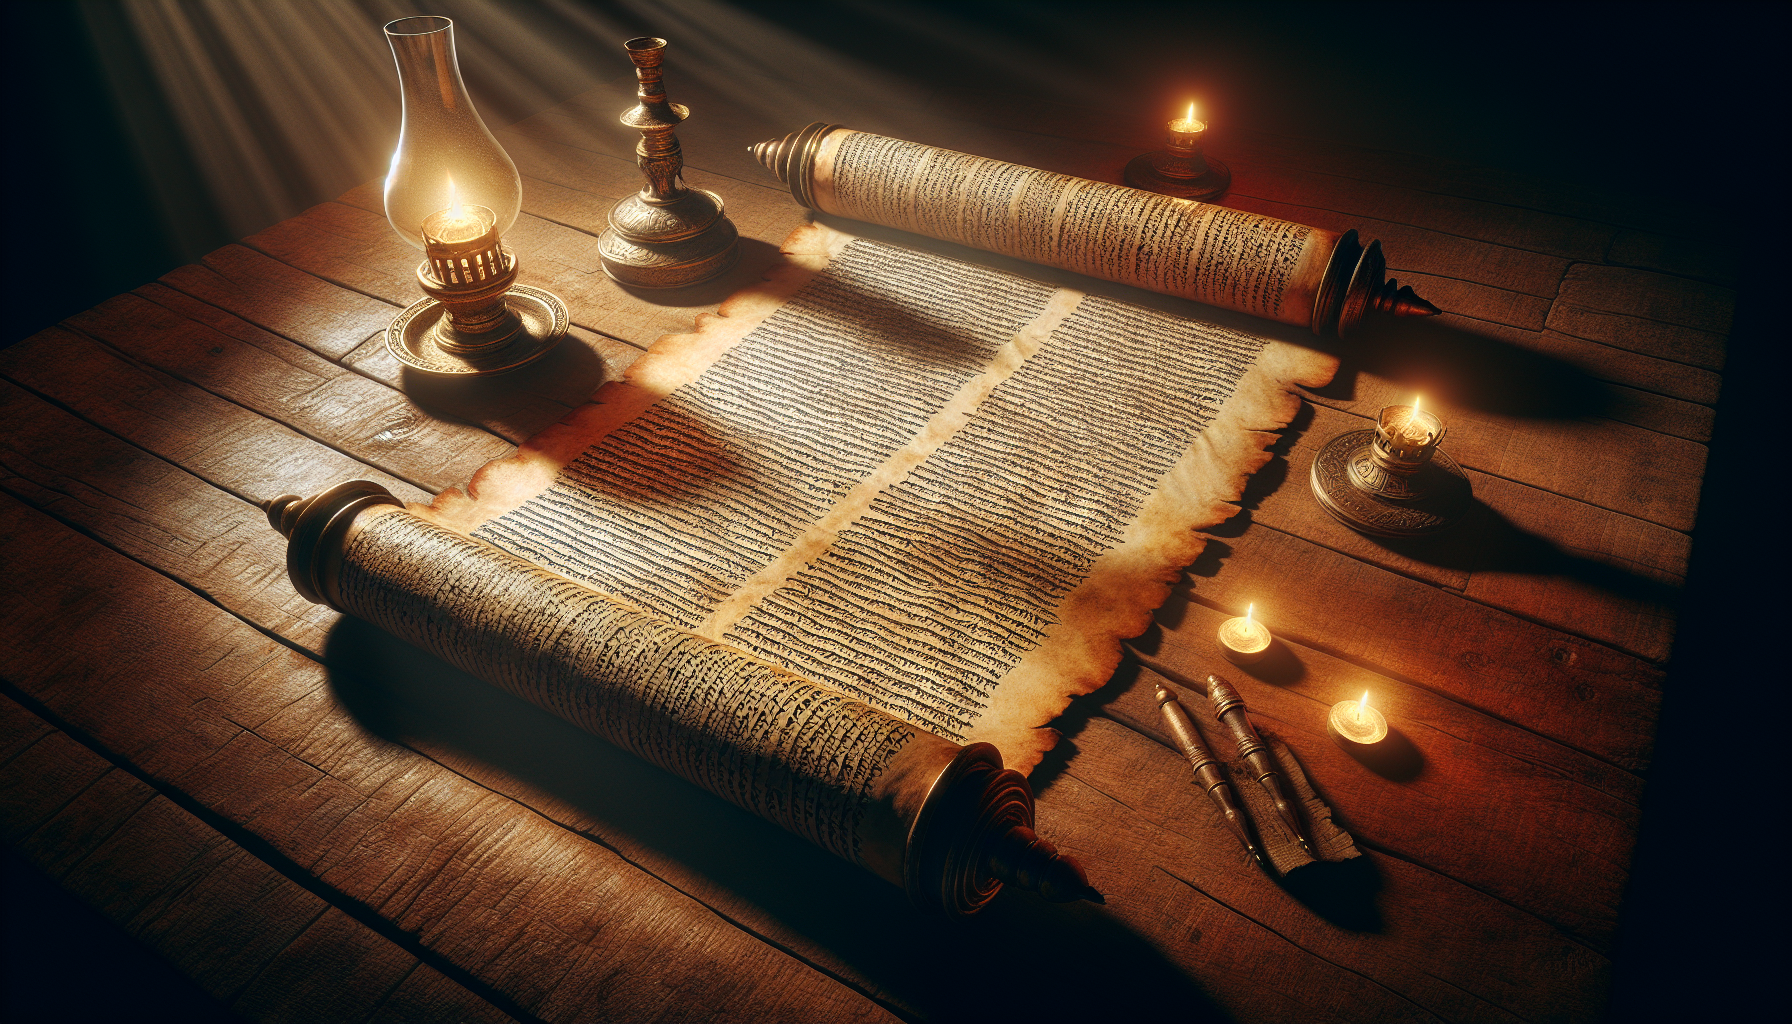 An ancient scroll opened on a wooden table with Hebrew texts, surrounded by oil lamps, under soft candlelight, illustrating a serene biblical study scene.